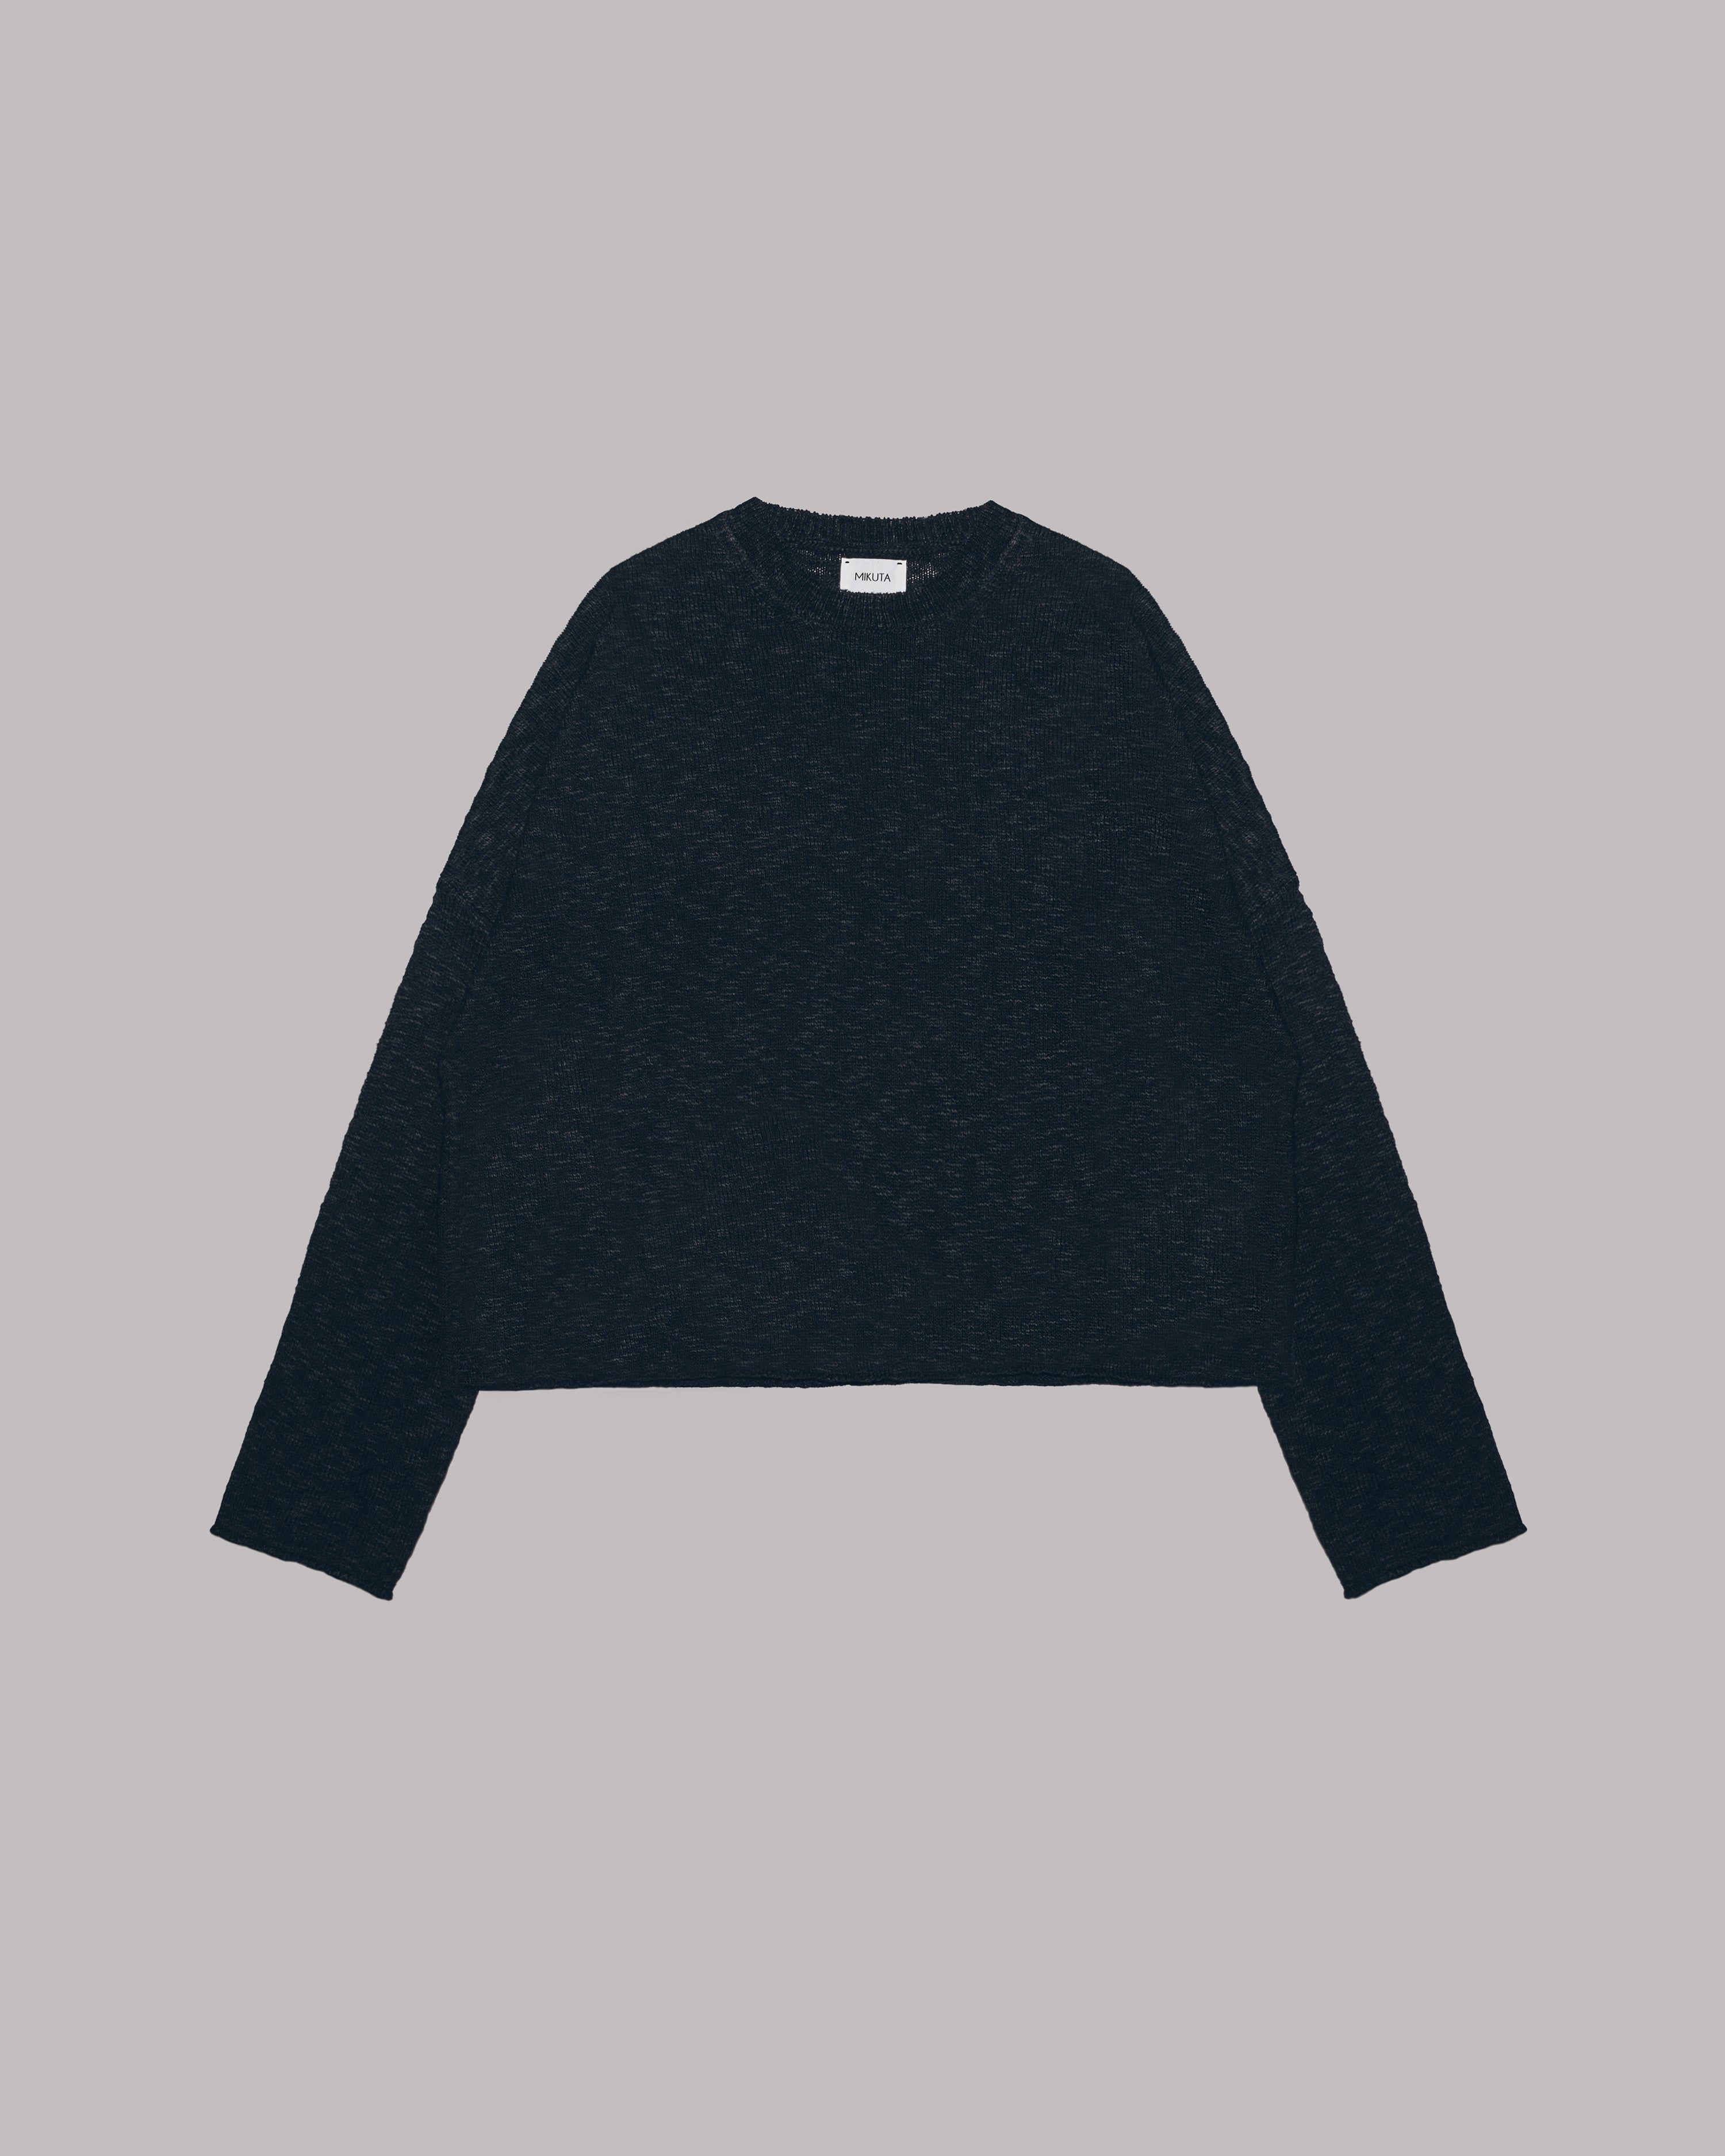 The Black Thin Knit Sweater